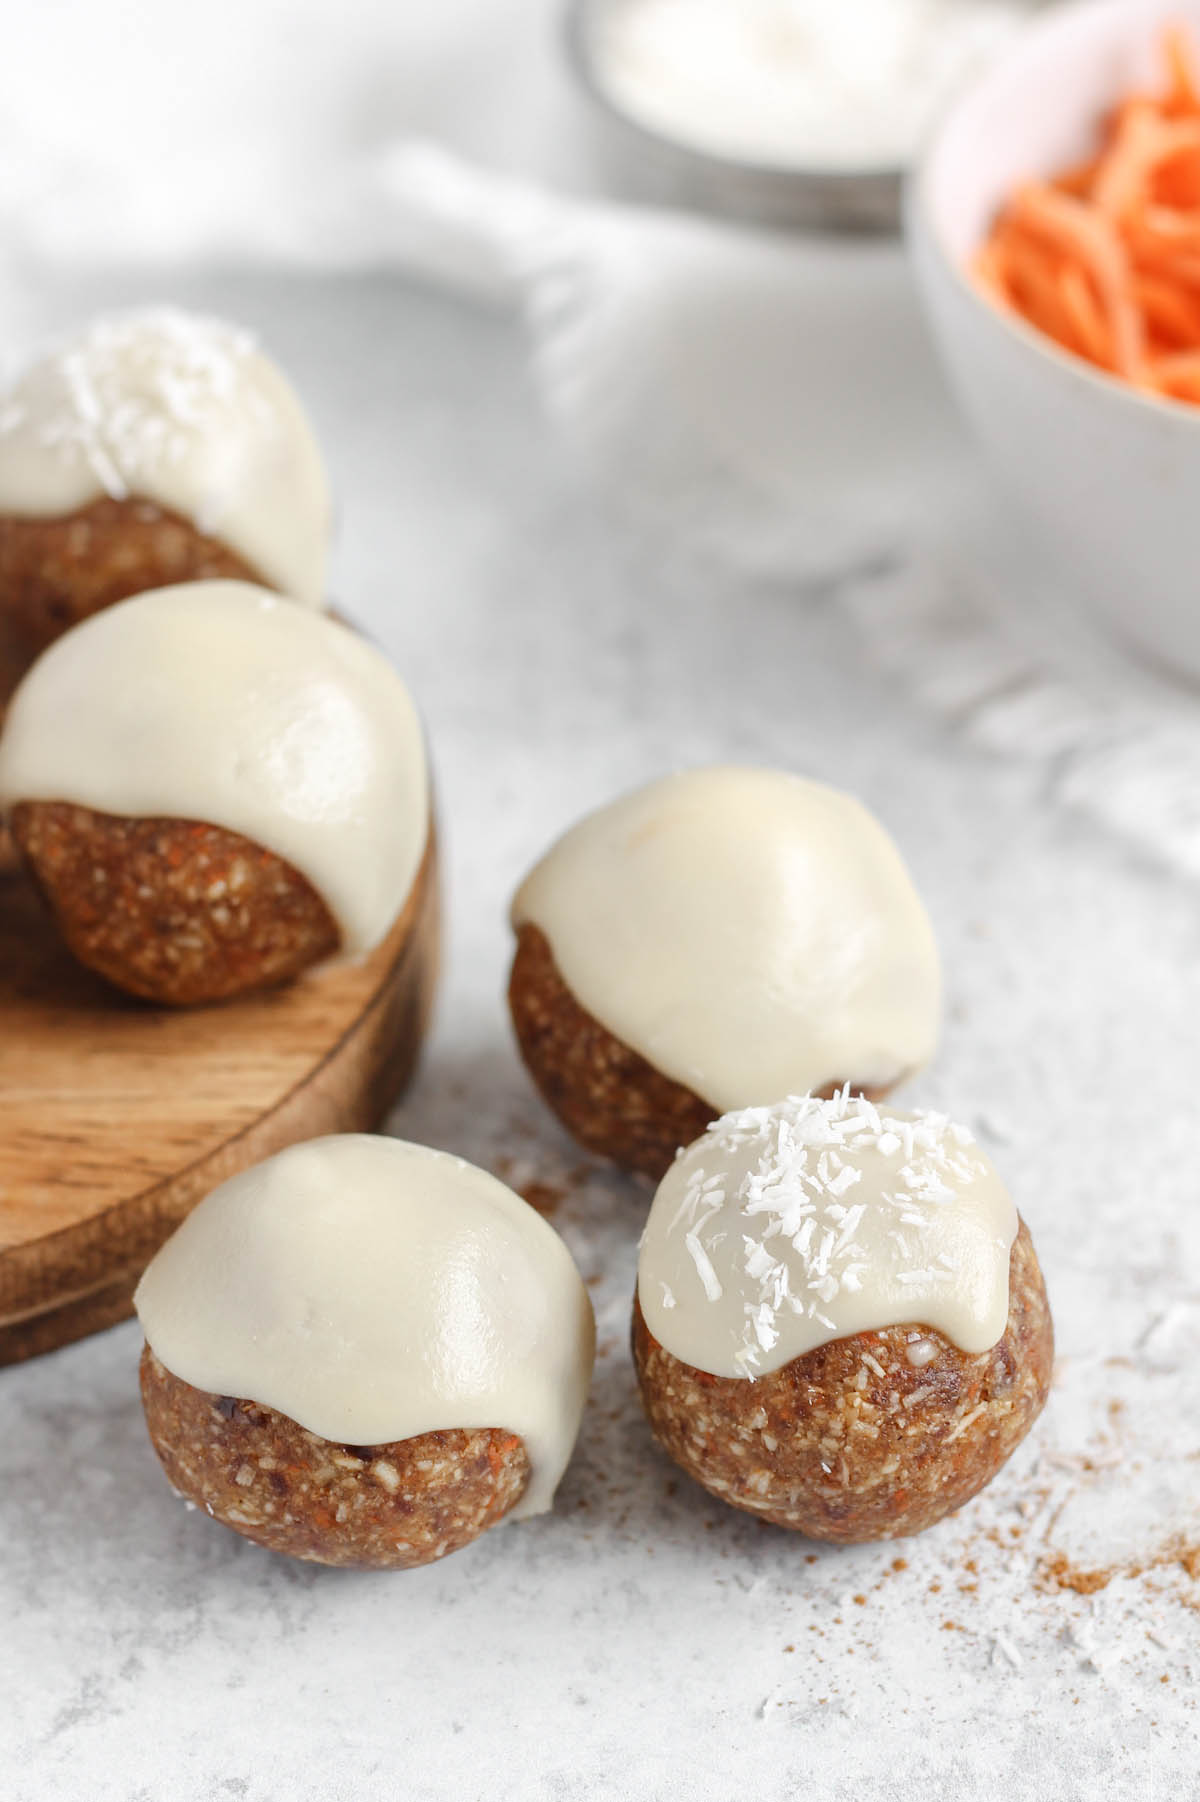 Three carrot cake bites topped with glaze on a gray surface with a bowl of shredded carrots in the background.